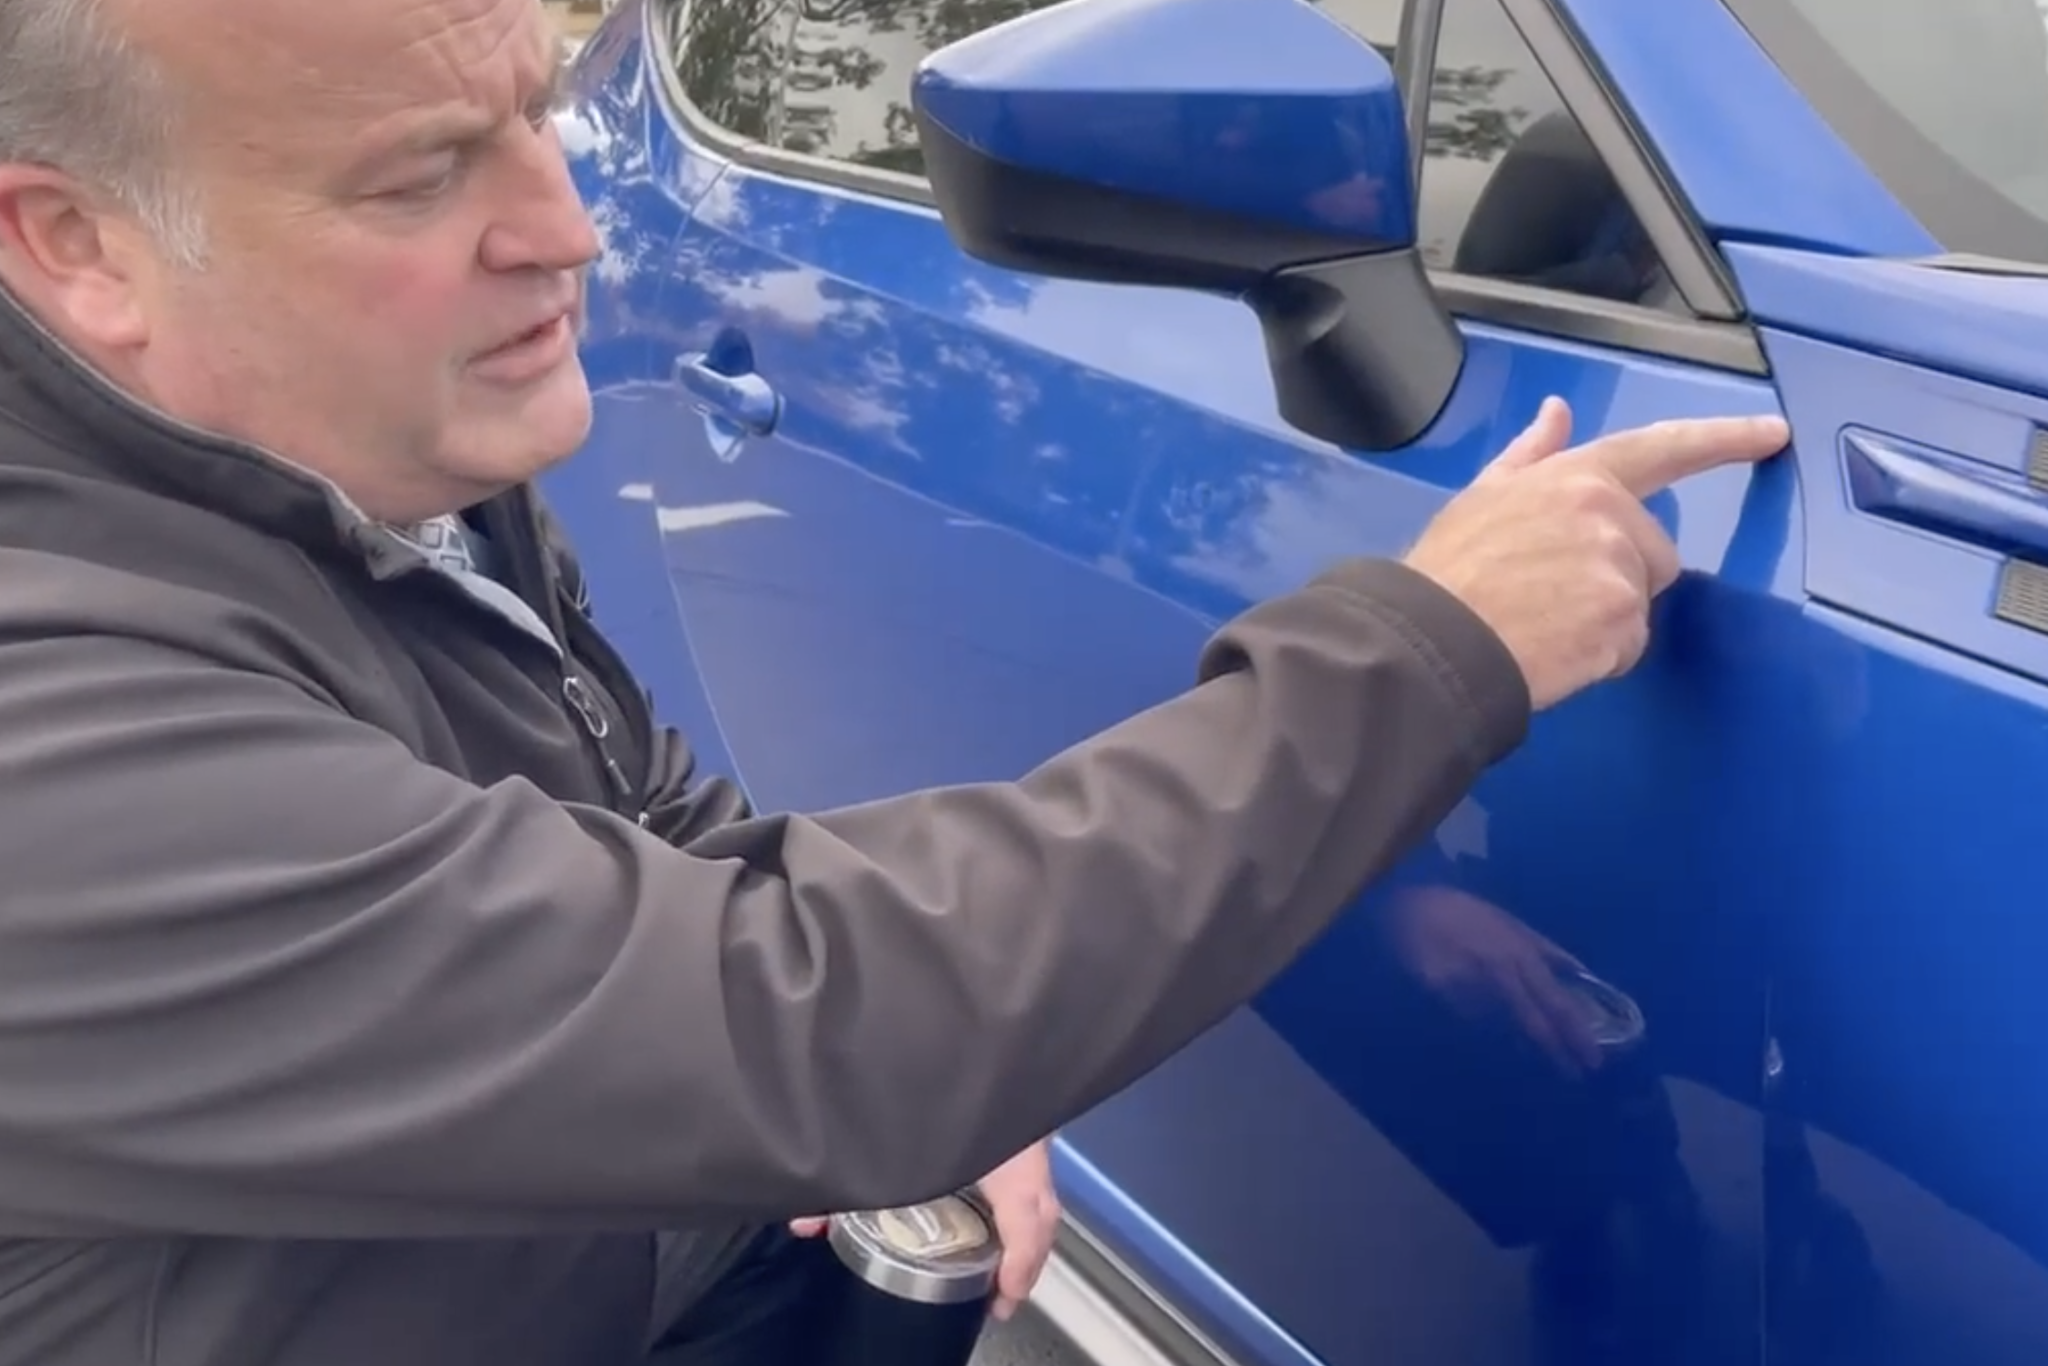 Lifetime Car Salesman Has Easy Tip For Telling If a Car Has Been in a Wreck